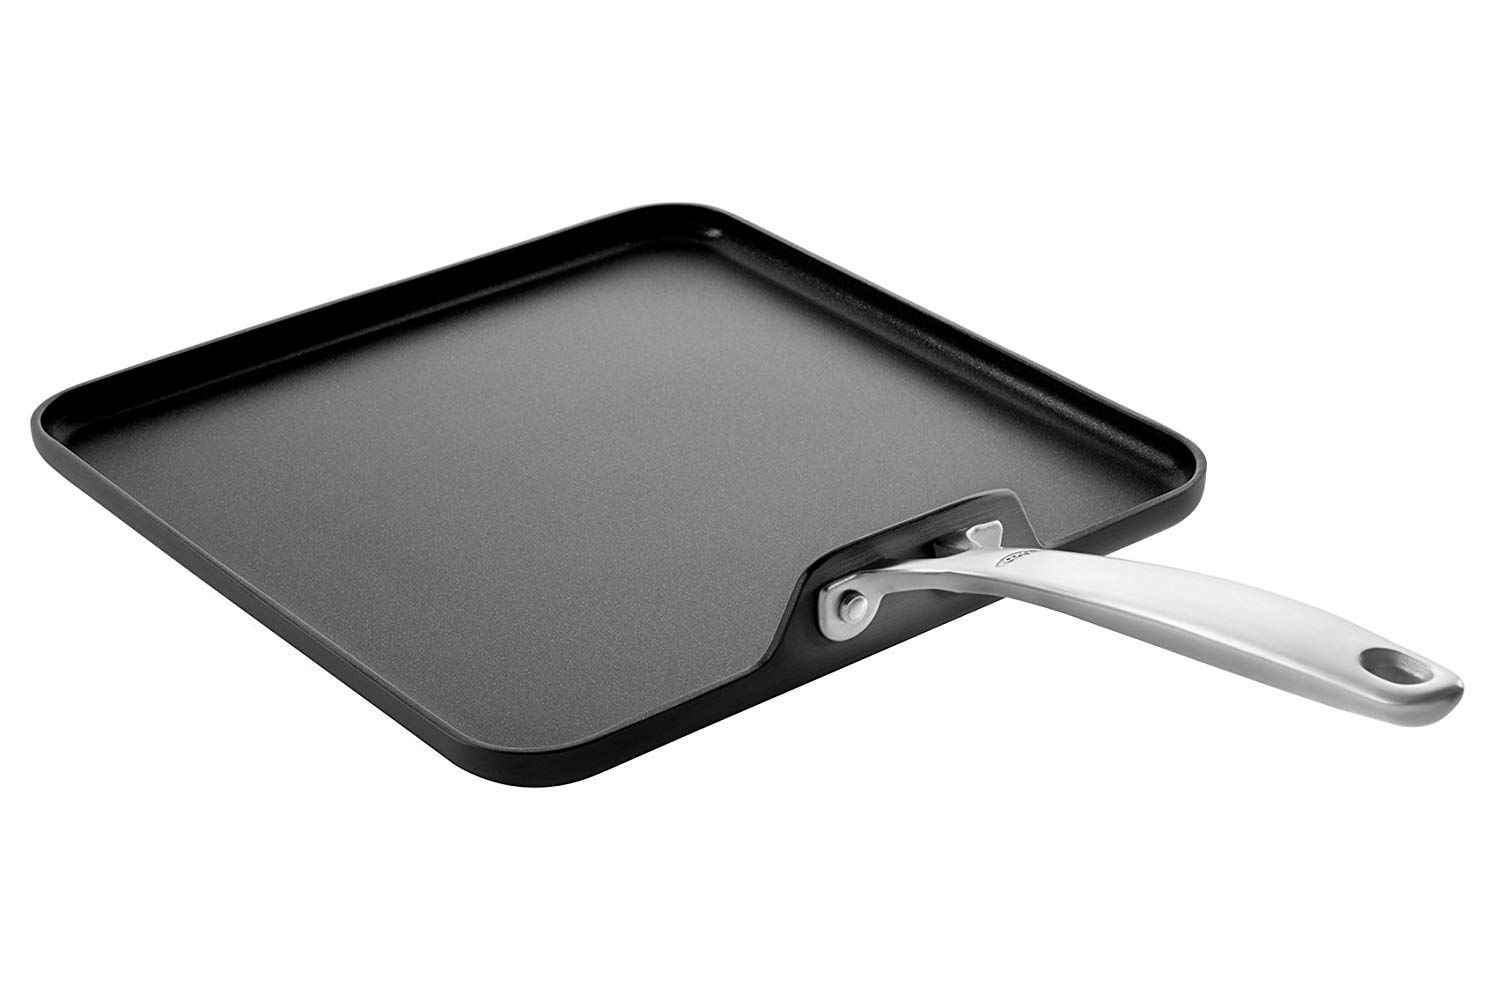 OXO Good Grips Tri-Ply Pro 11-Inch Stainless Steel Square Grill Pan